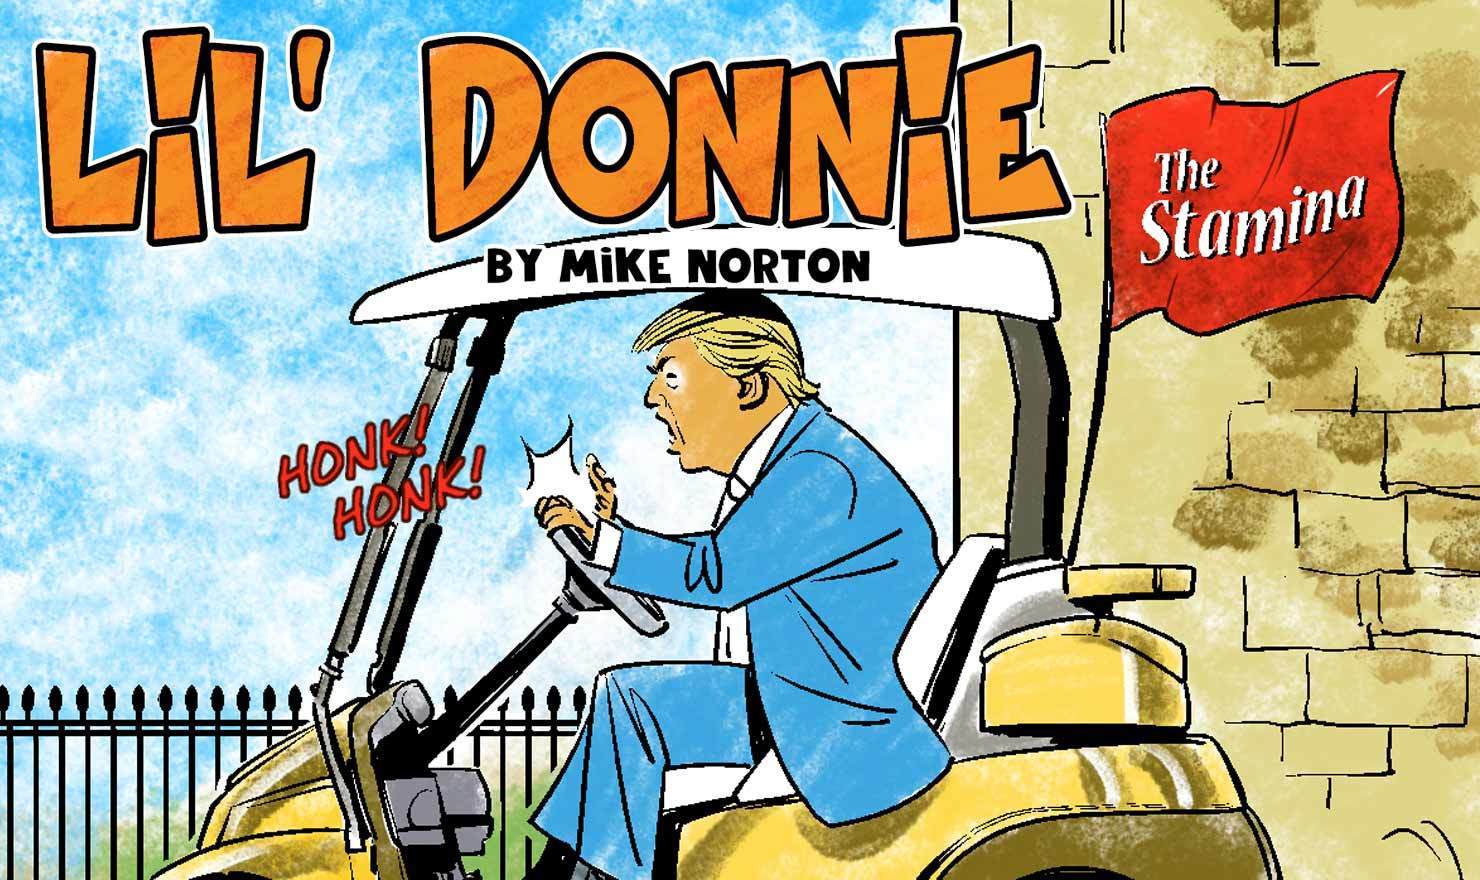 Meet Your Creator: Mike Norton Of 'Lil' Donnie'